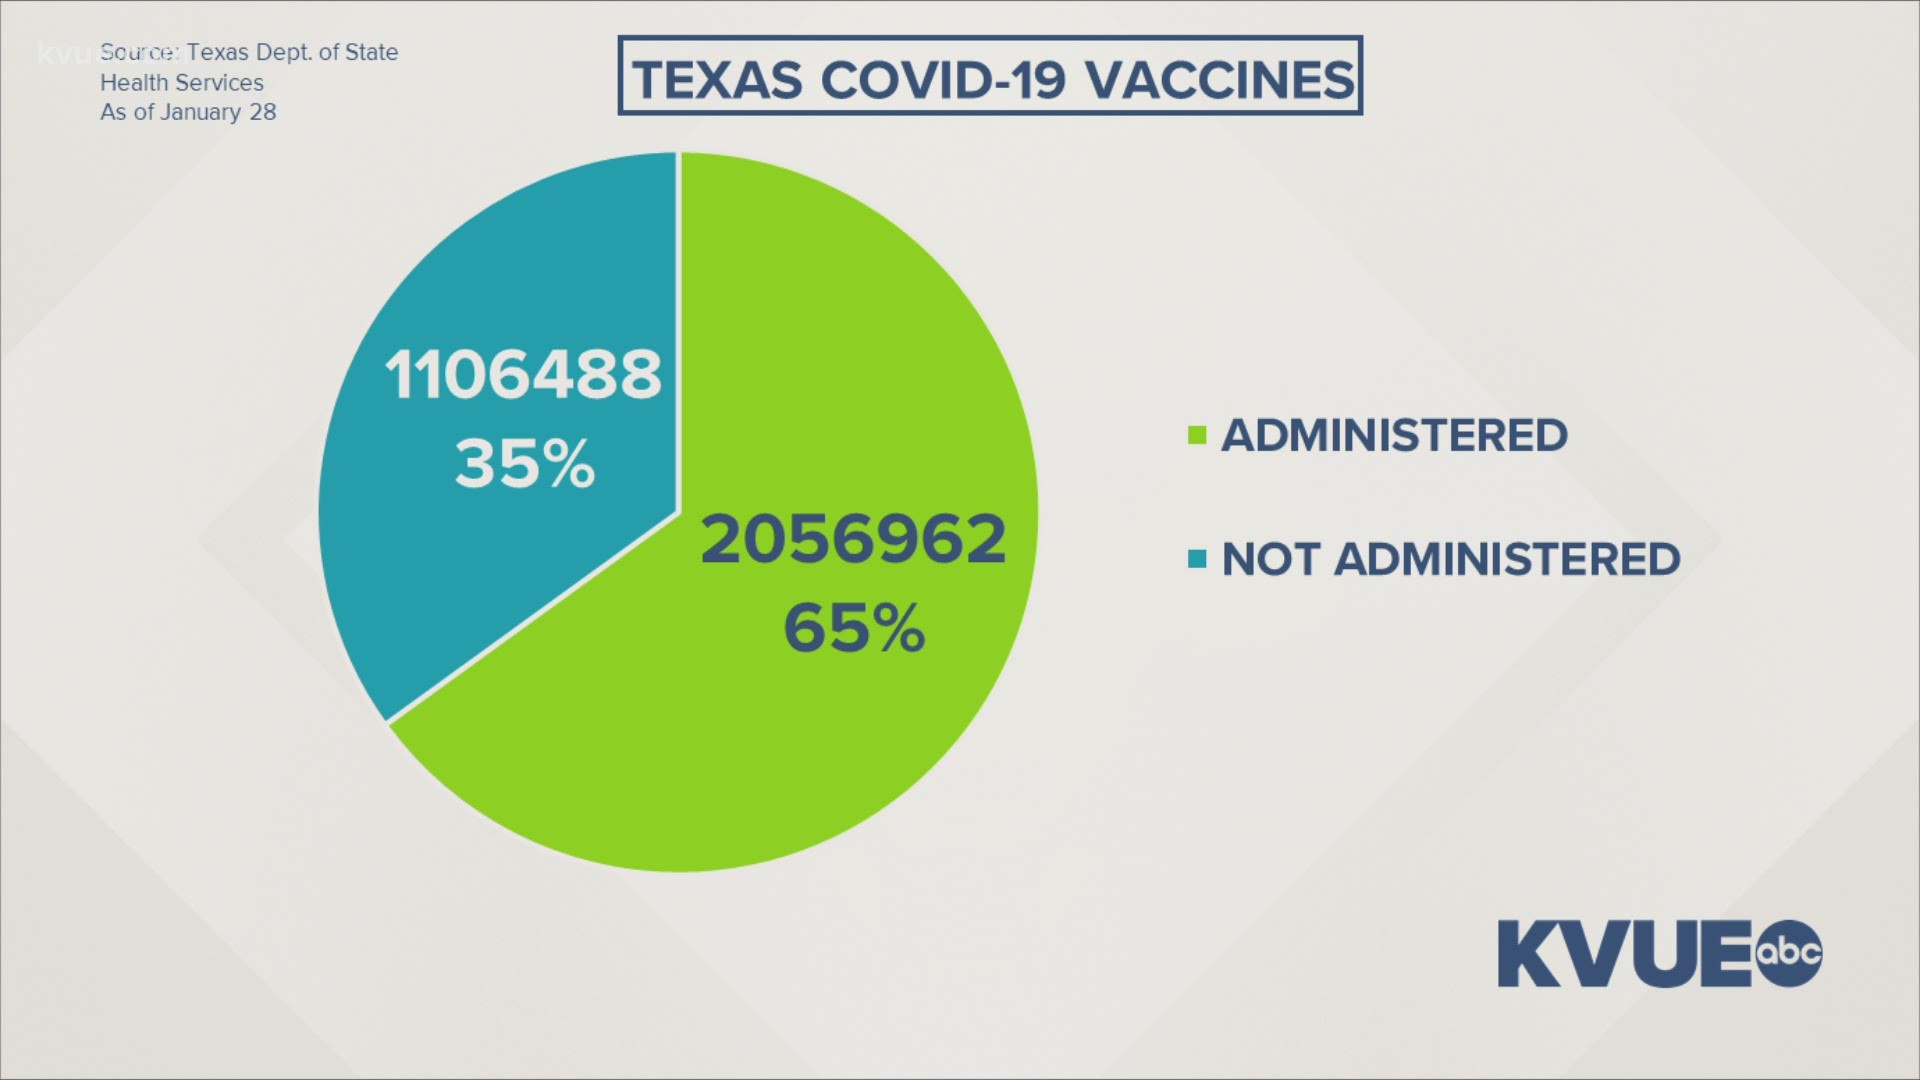 Nearly 1.7 million people have received the first dose of the vaccine in Texas, but state officials say they're still pushing for improvements.